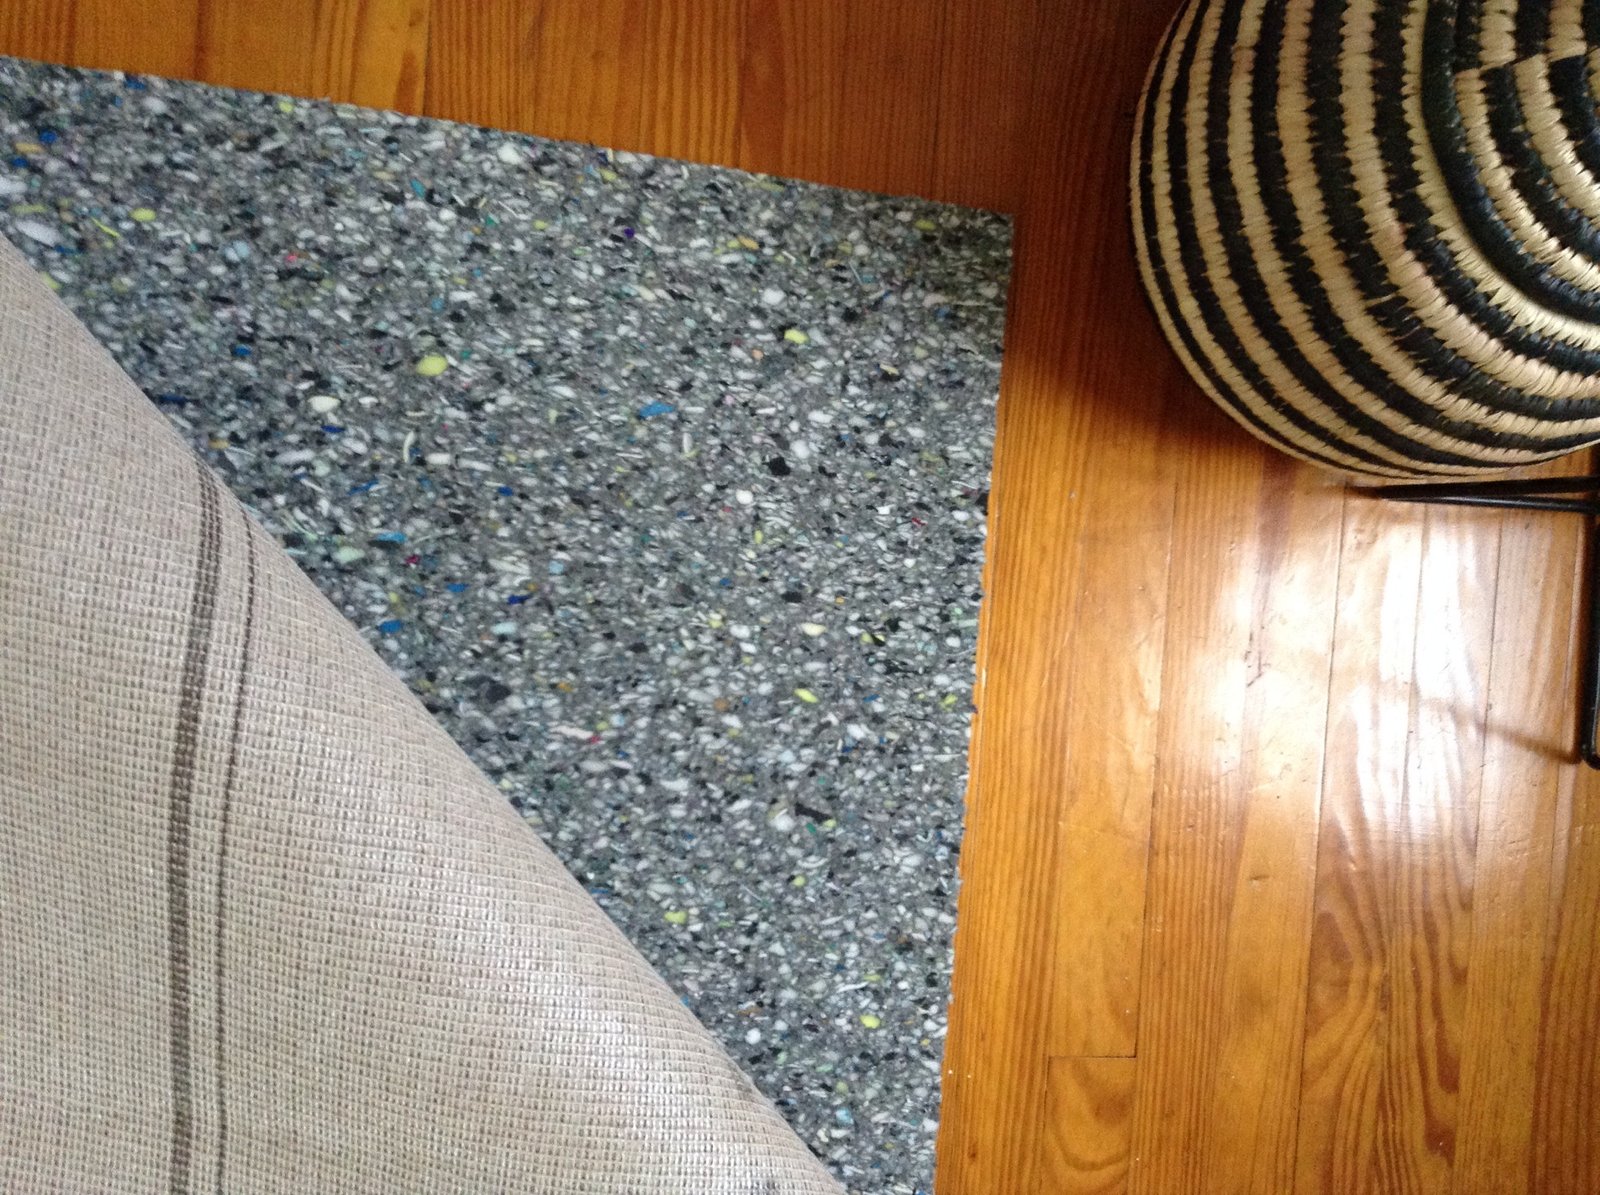 From a floor mans perspective: Carpet Binding: Do it yourself or hire a carpet  binding pro ?